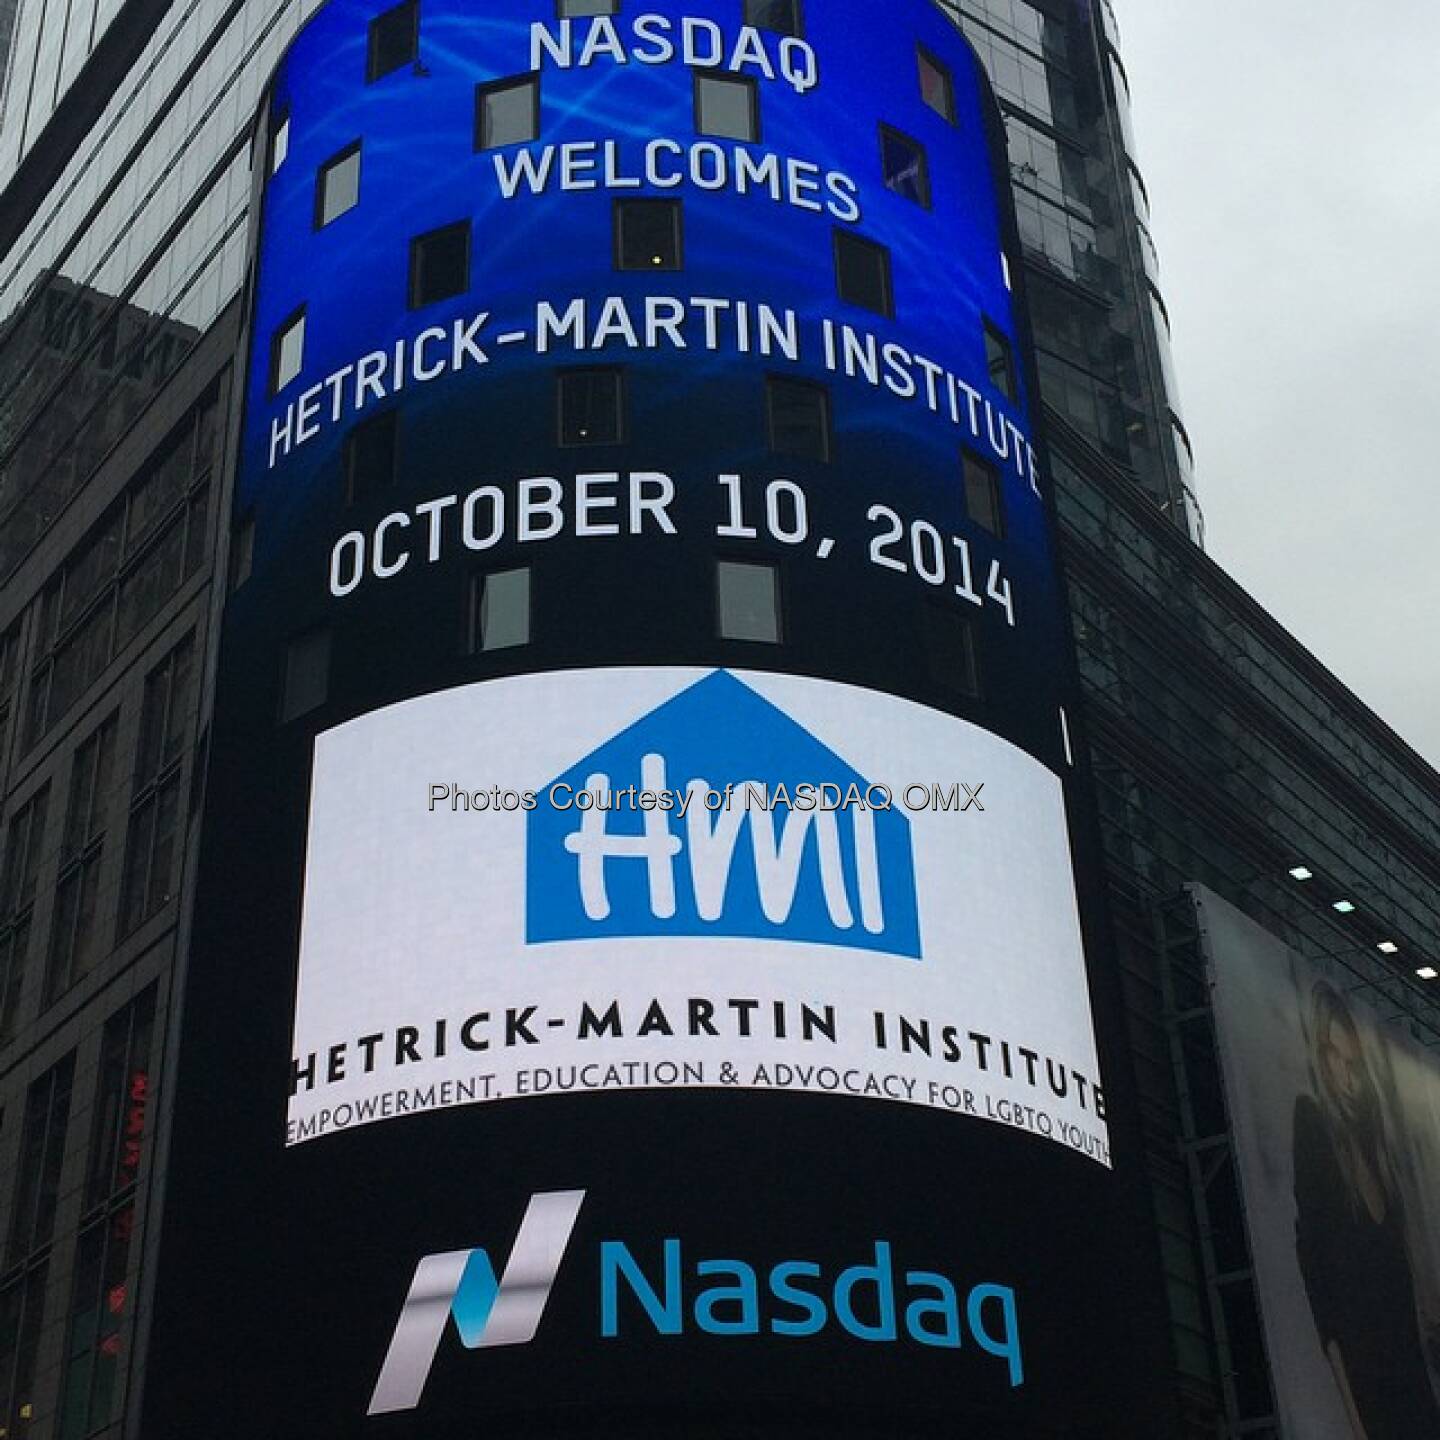 After the bell @HetrickMartin is in #TimesSquare to celebrate #ComingOutDay tomorrow! #HMI35 #LGBT  Source: http://facebook.com/NASDAQ